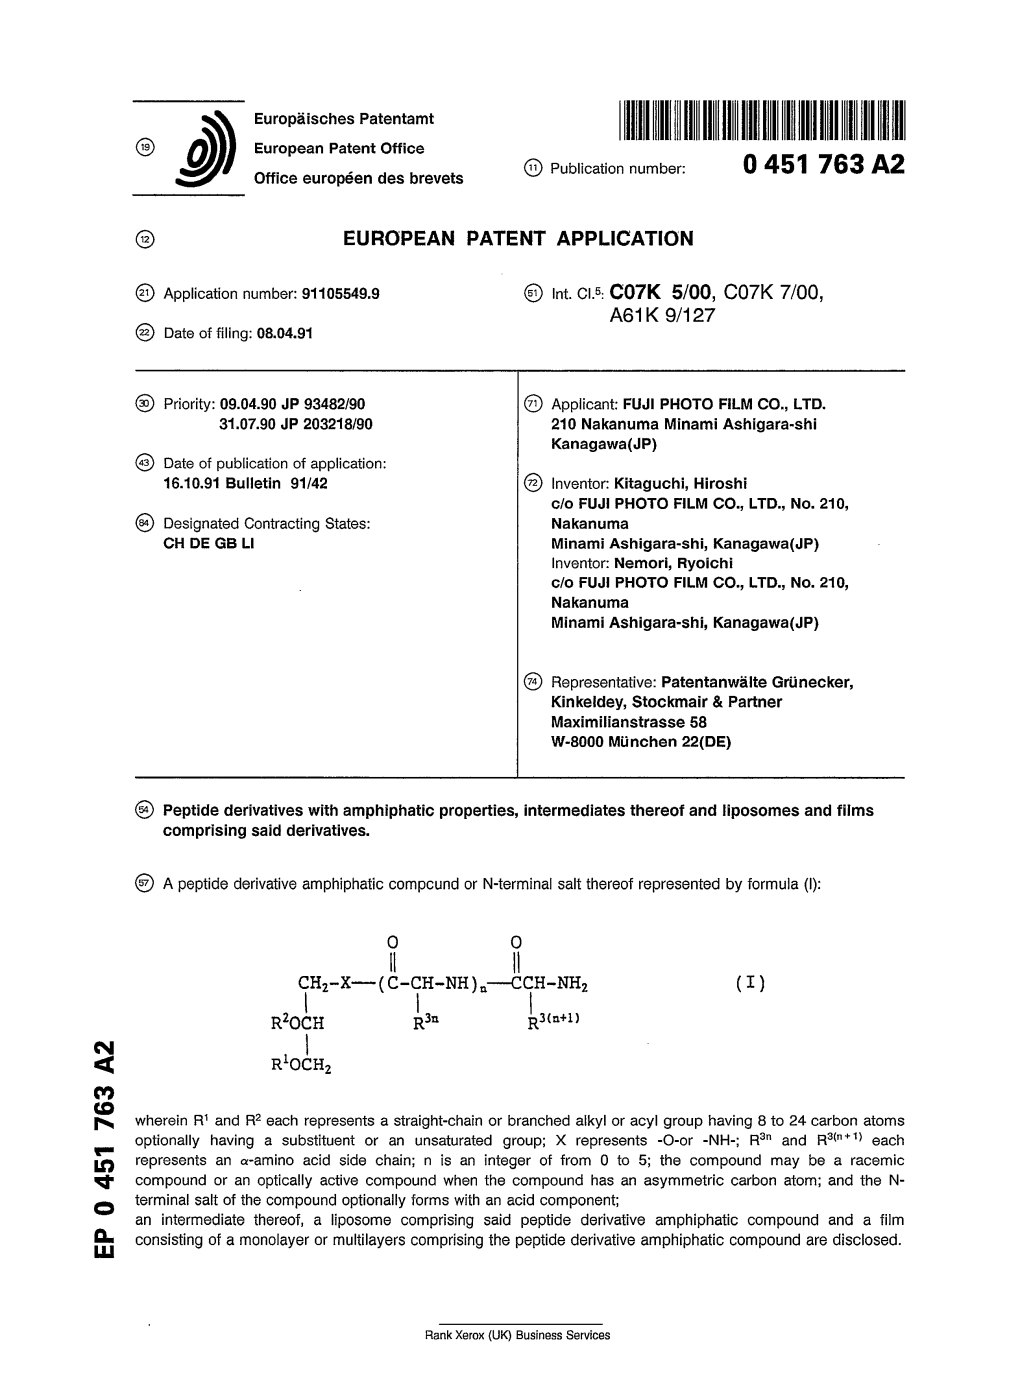 Peptide Derivatives with Amphiphatic Properties, Intermediates Thereof and Liposomes and Films Comprising Said Derivatives